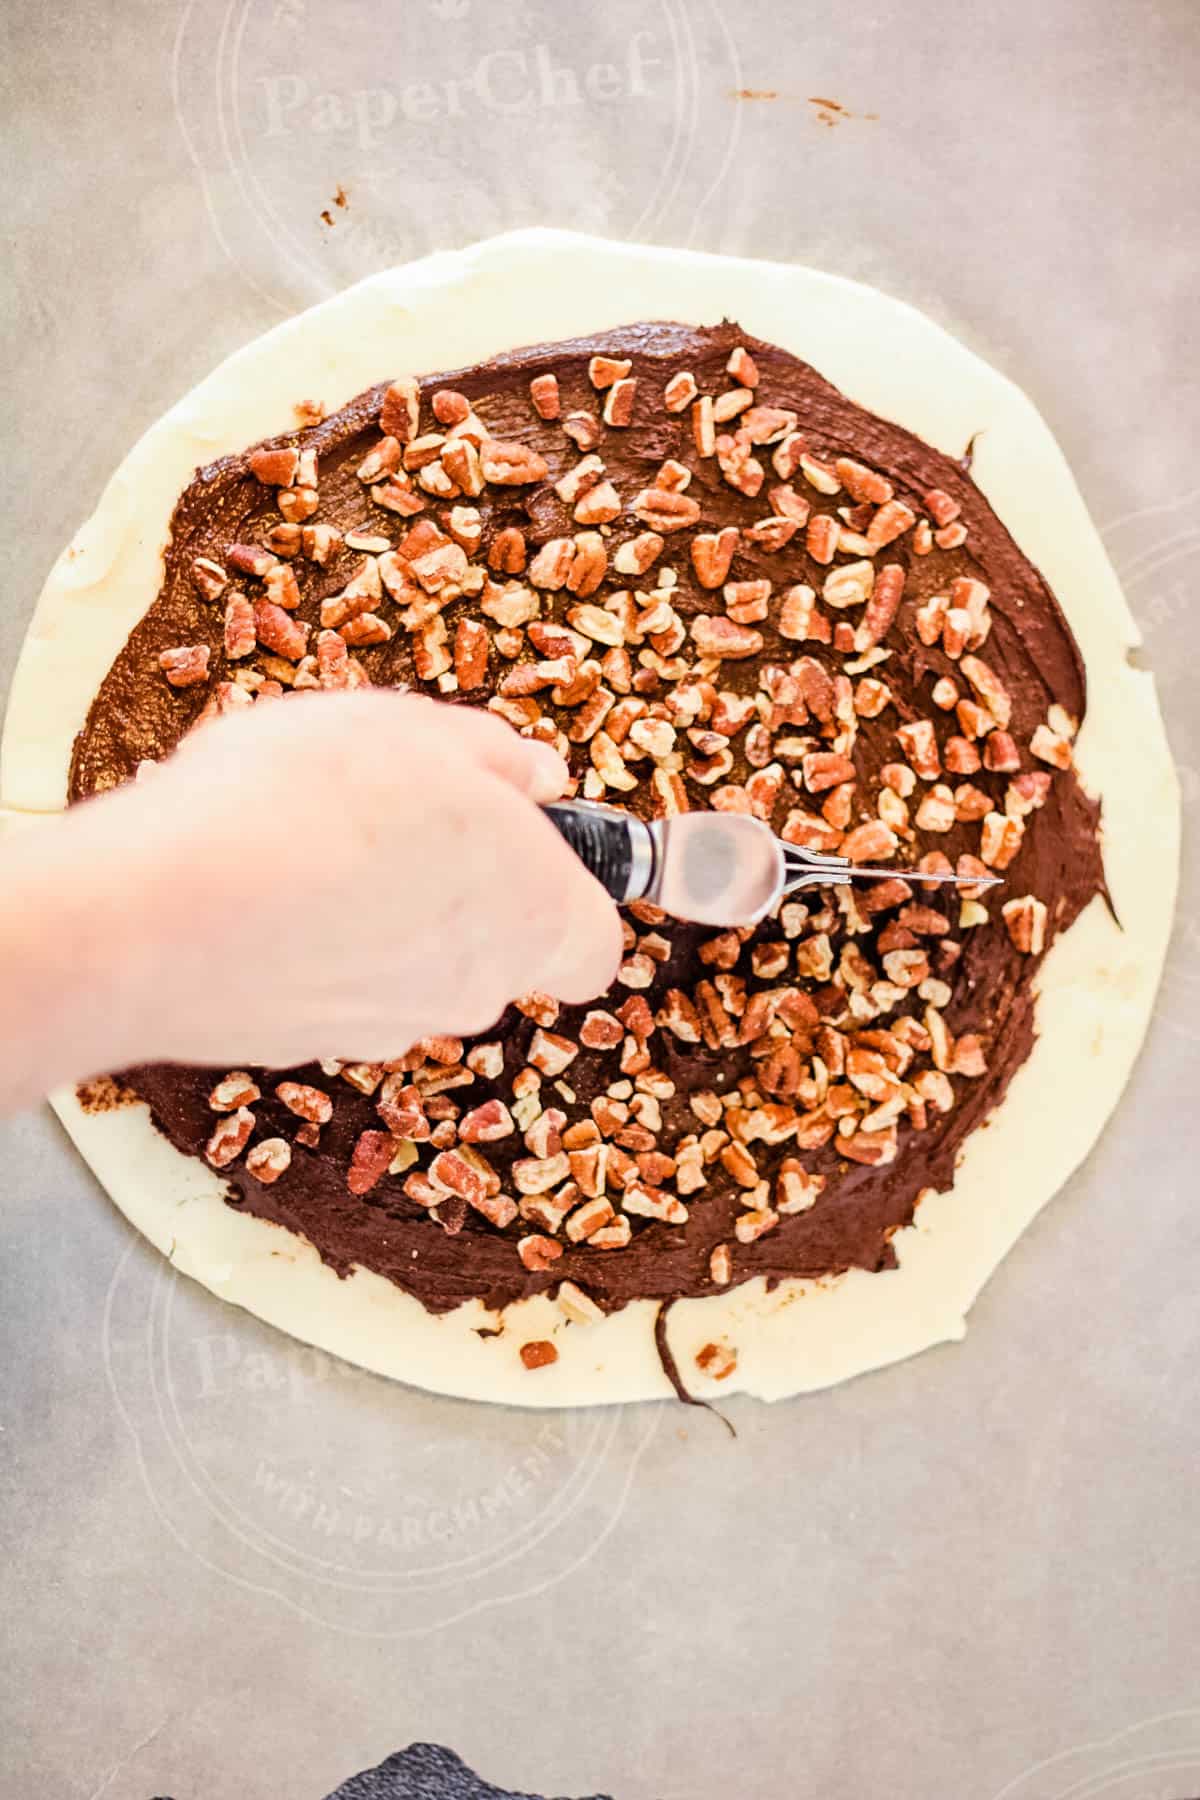 A person incorporating rugelach and pecans into a chocolate pizza creation.